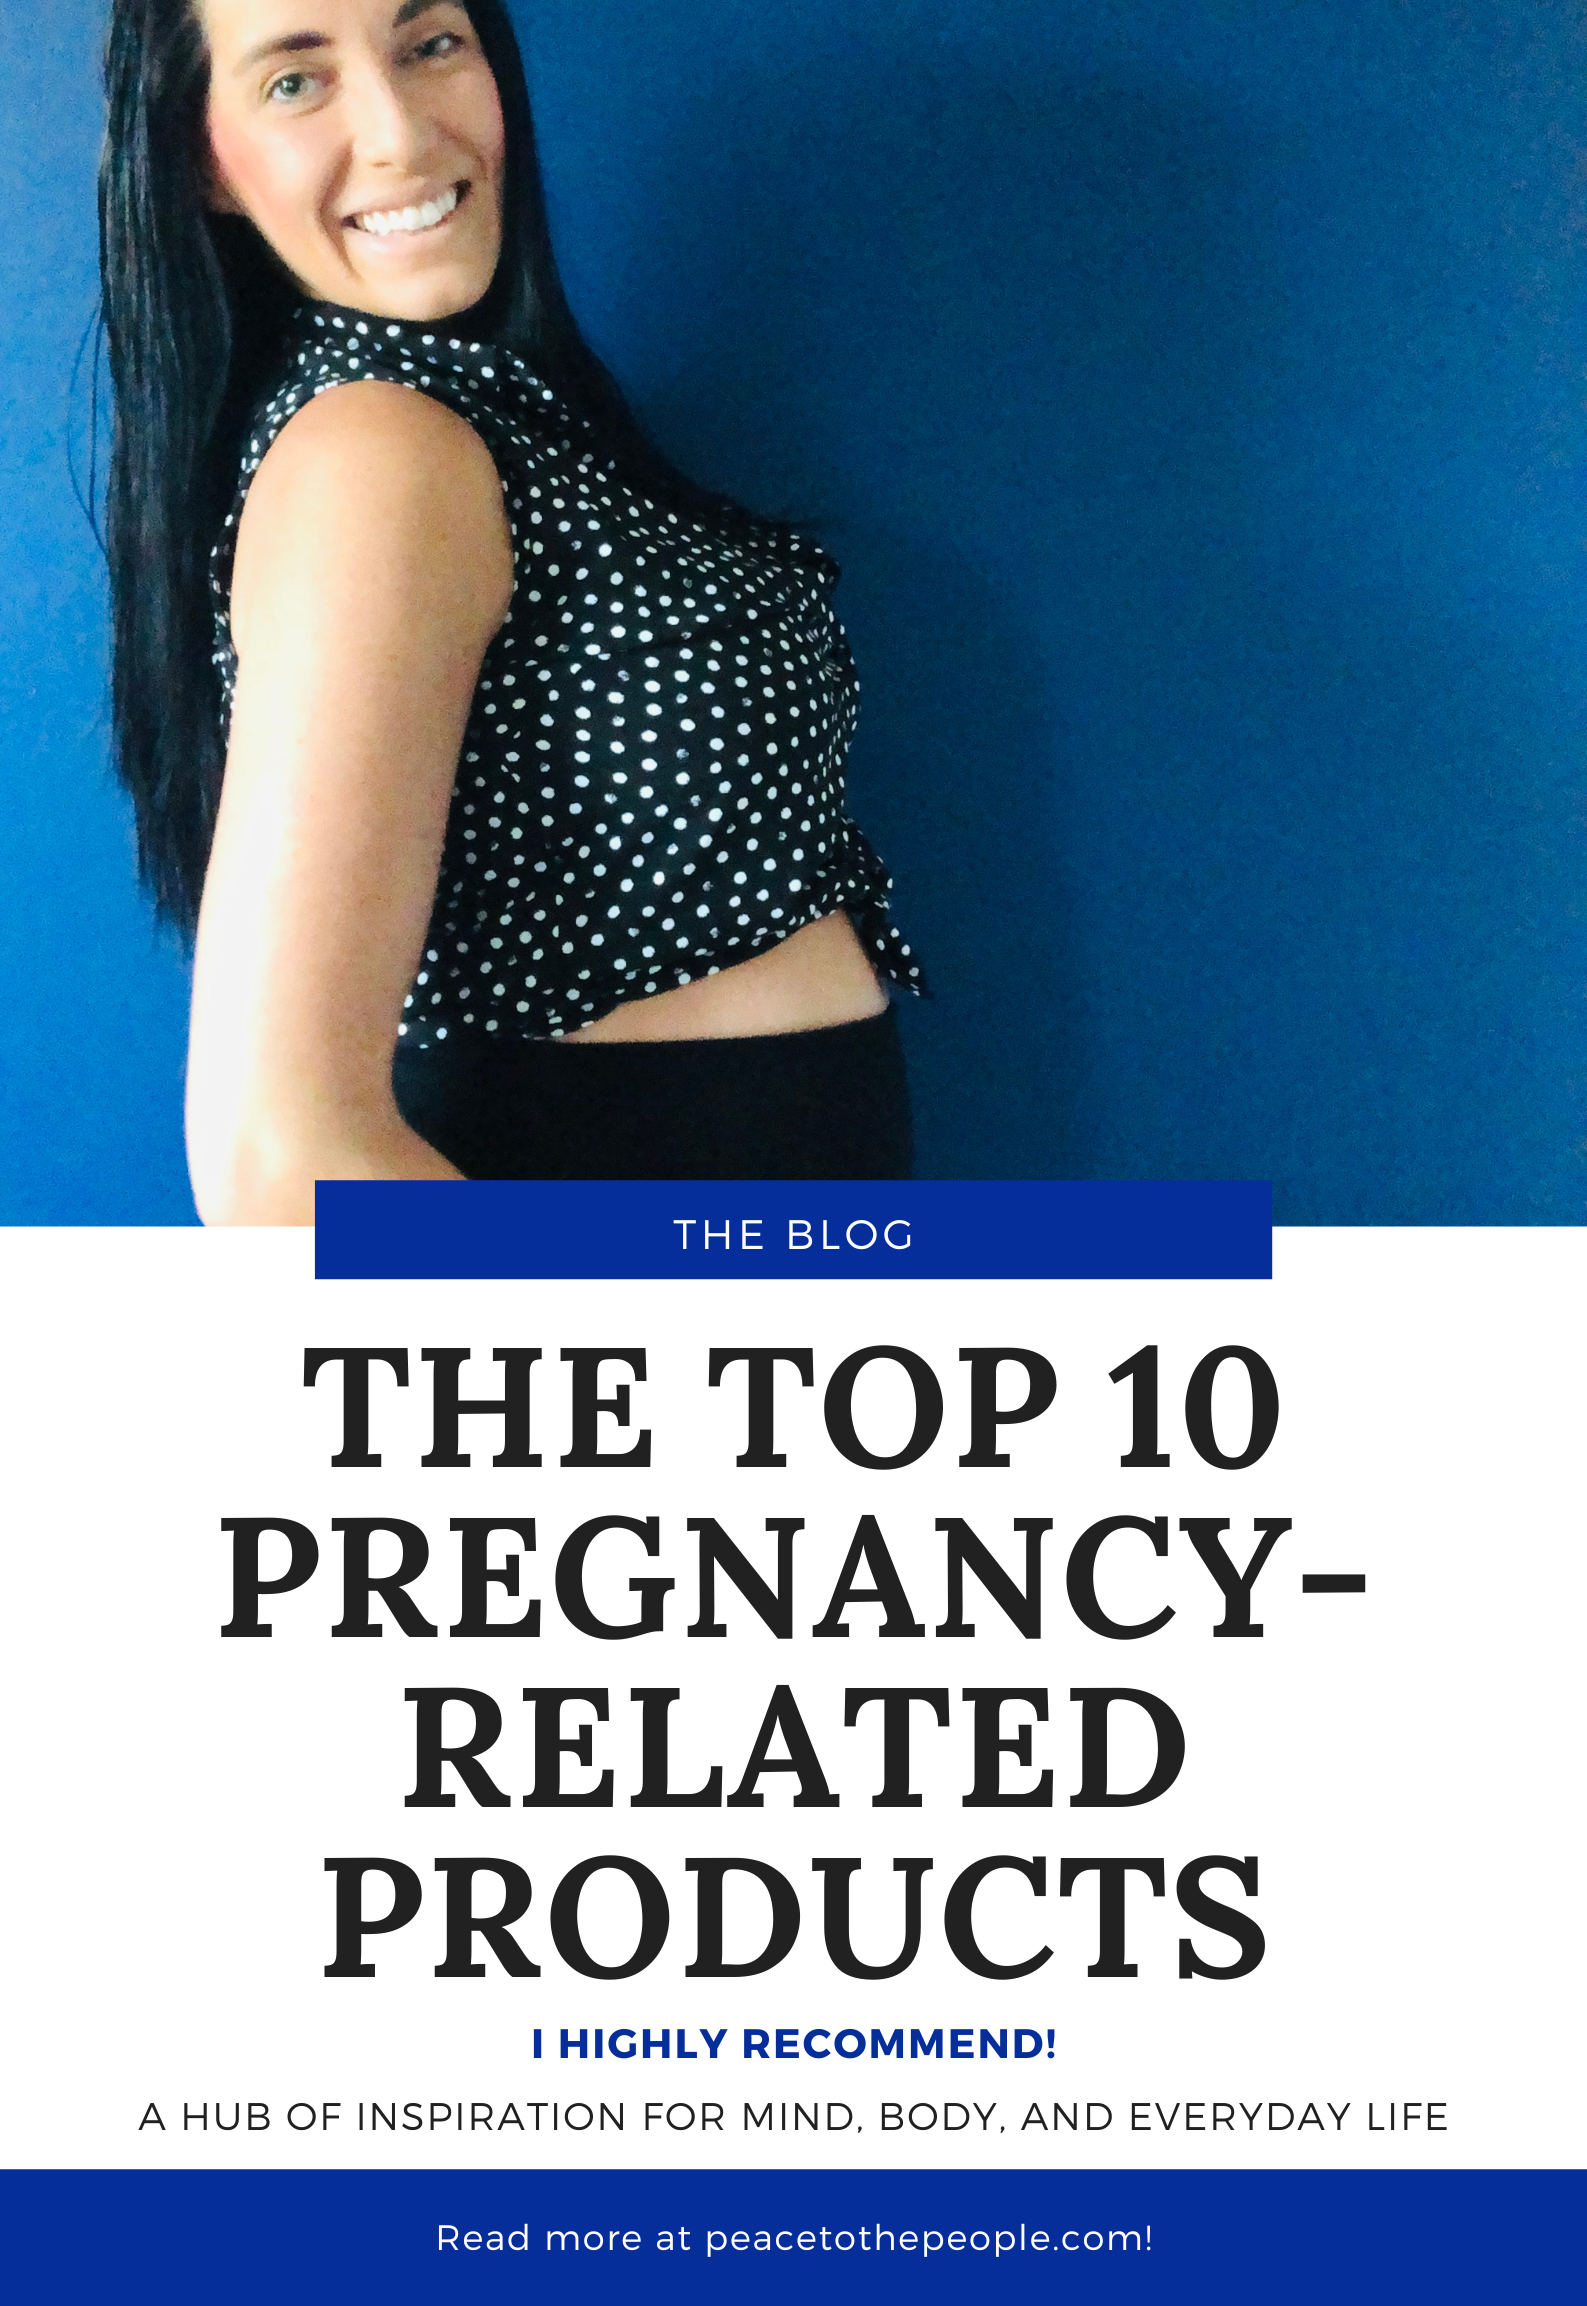 THE TOP 10 PREGNANCY-RELATED PRODUCTS I HIGHLY RECOMMEND • Peace to the People Blog